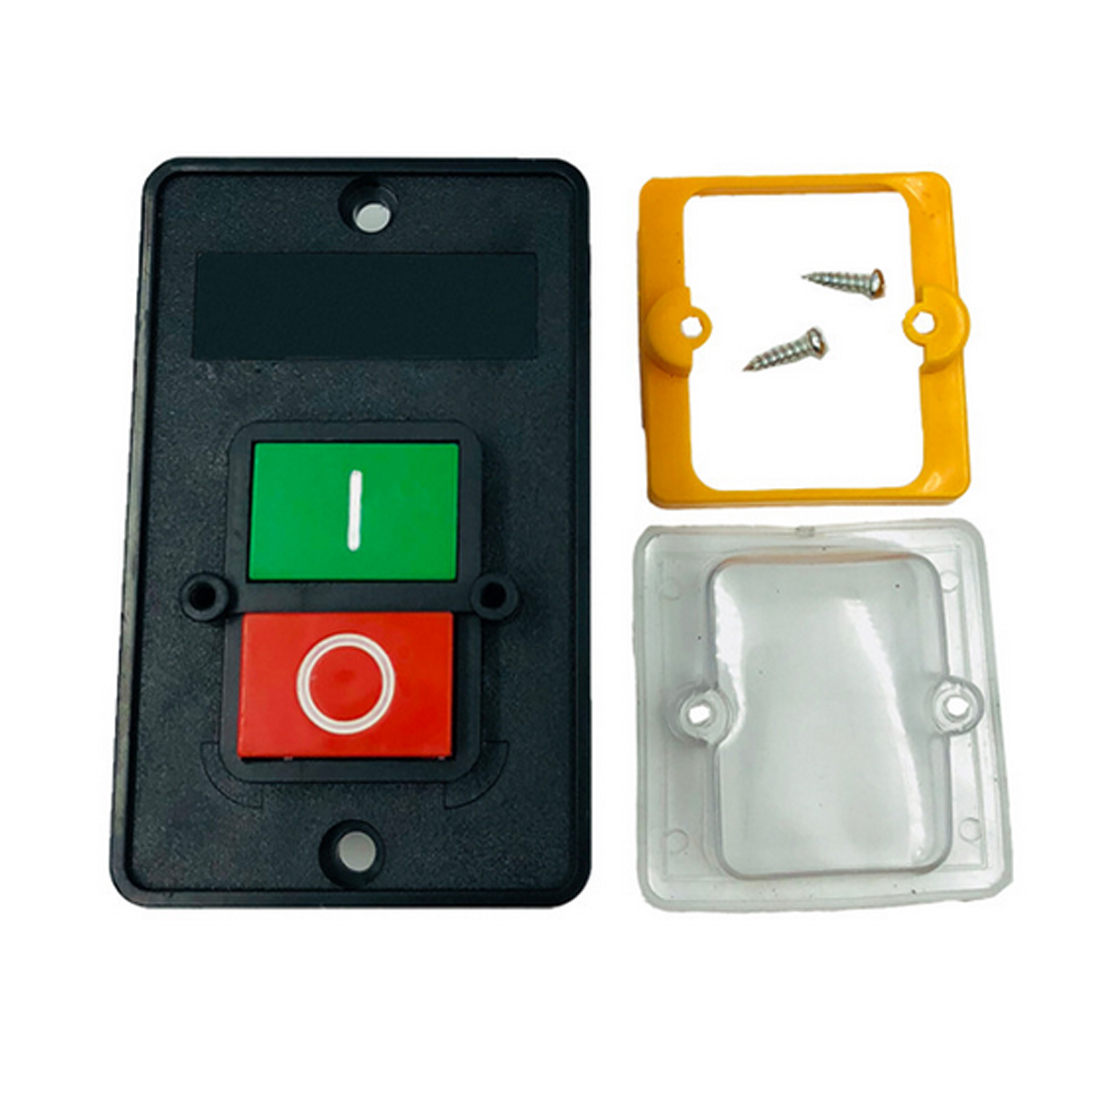 Waterproof Push Button Switch Power On/ Off Switch AC380V 10A for Cutting Machine Bench Drill Switch